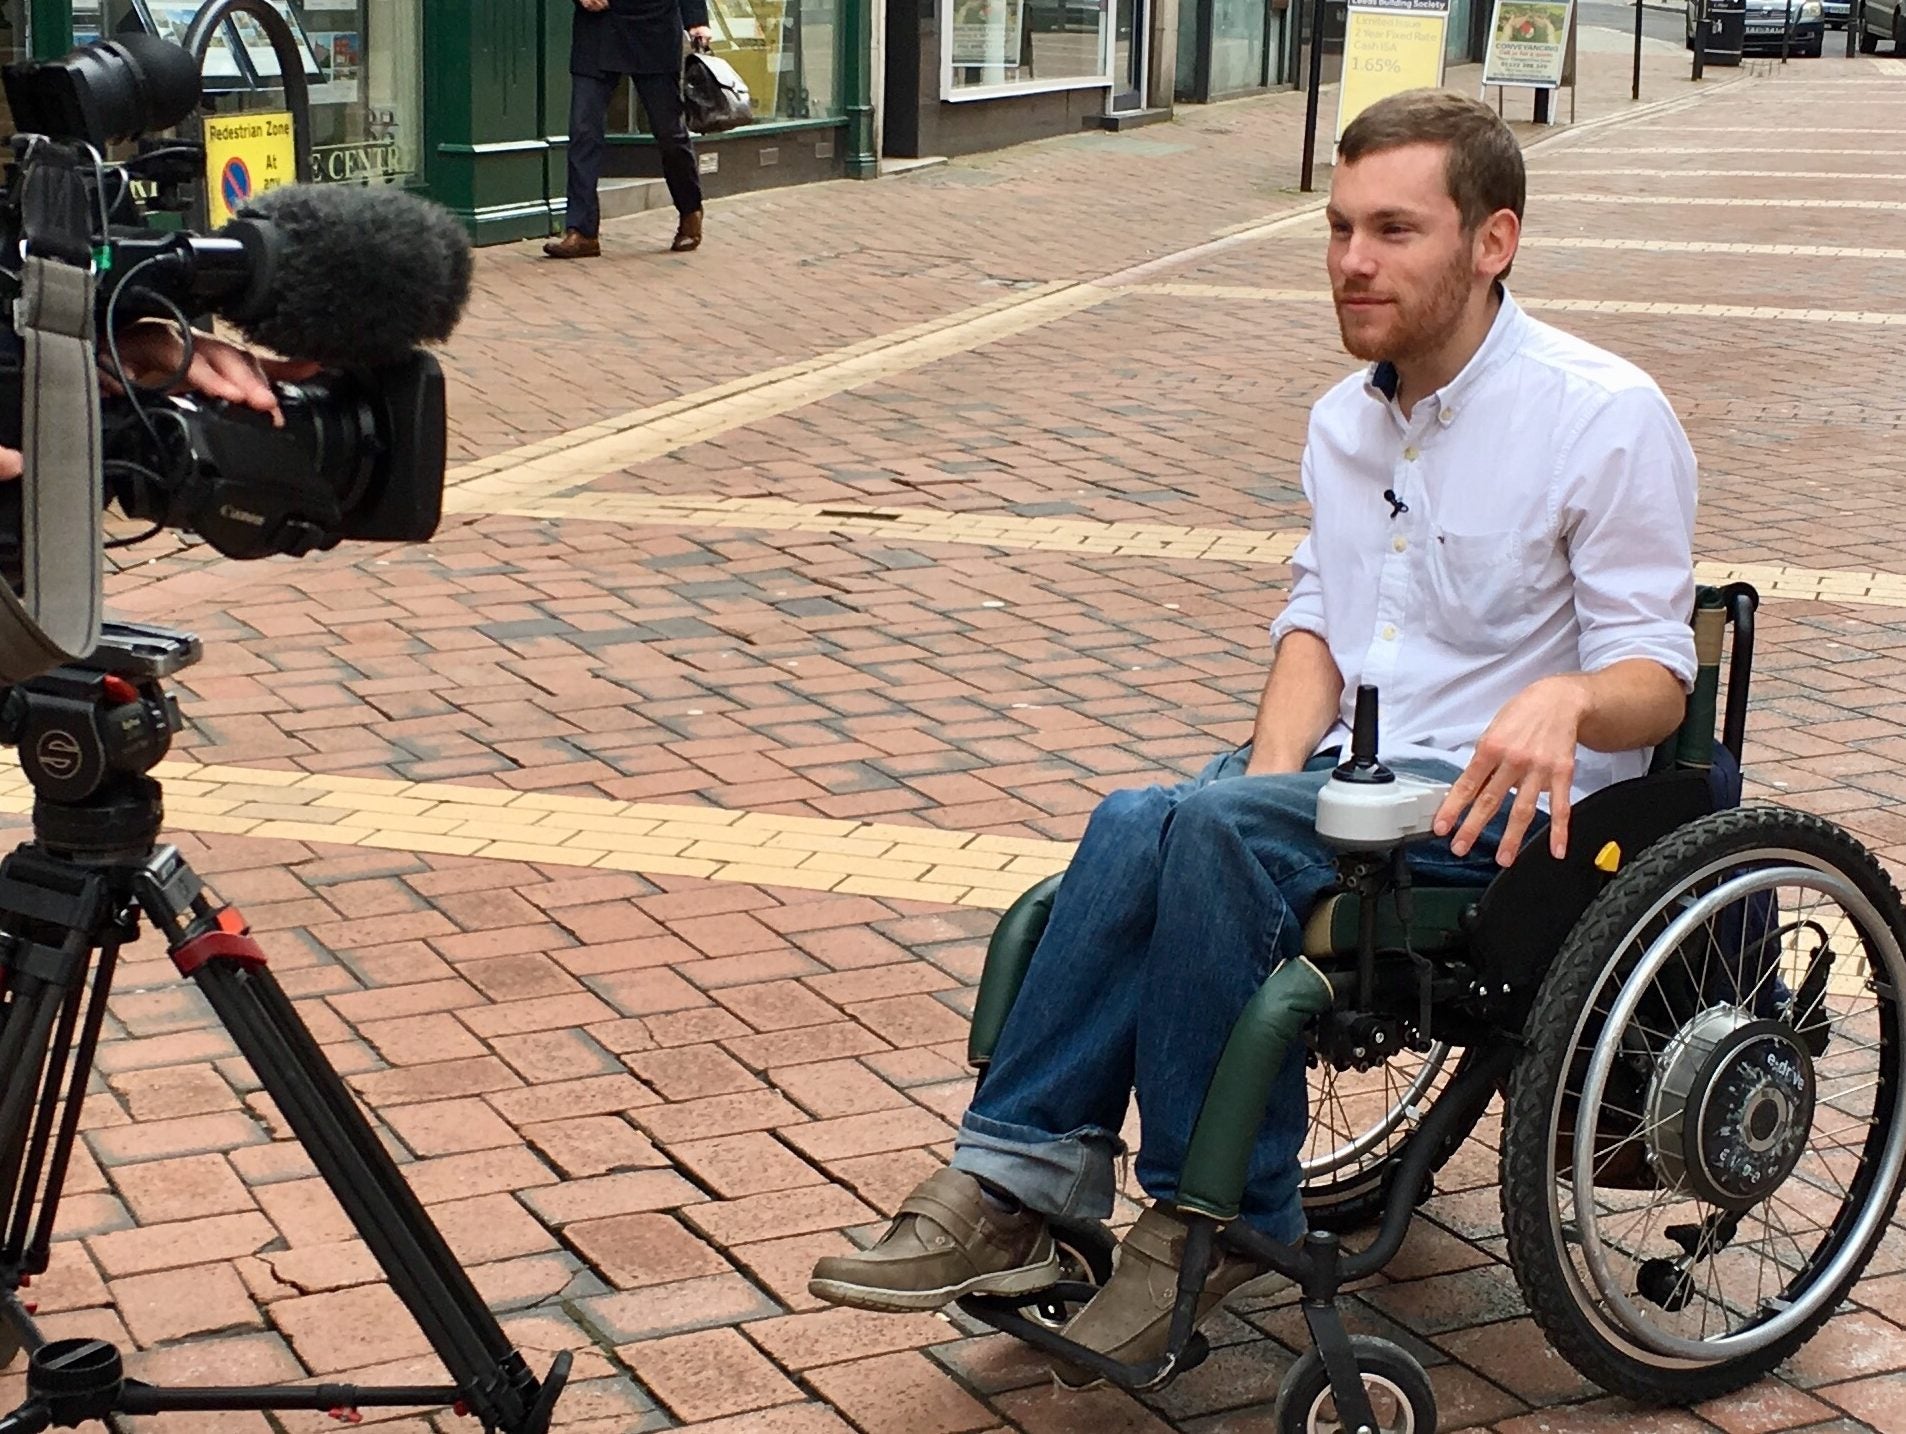 BBC News to invest further £1m in recruiting journalists with disabilities due to ‘under-representation’ across corporation